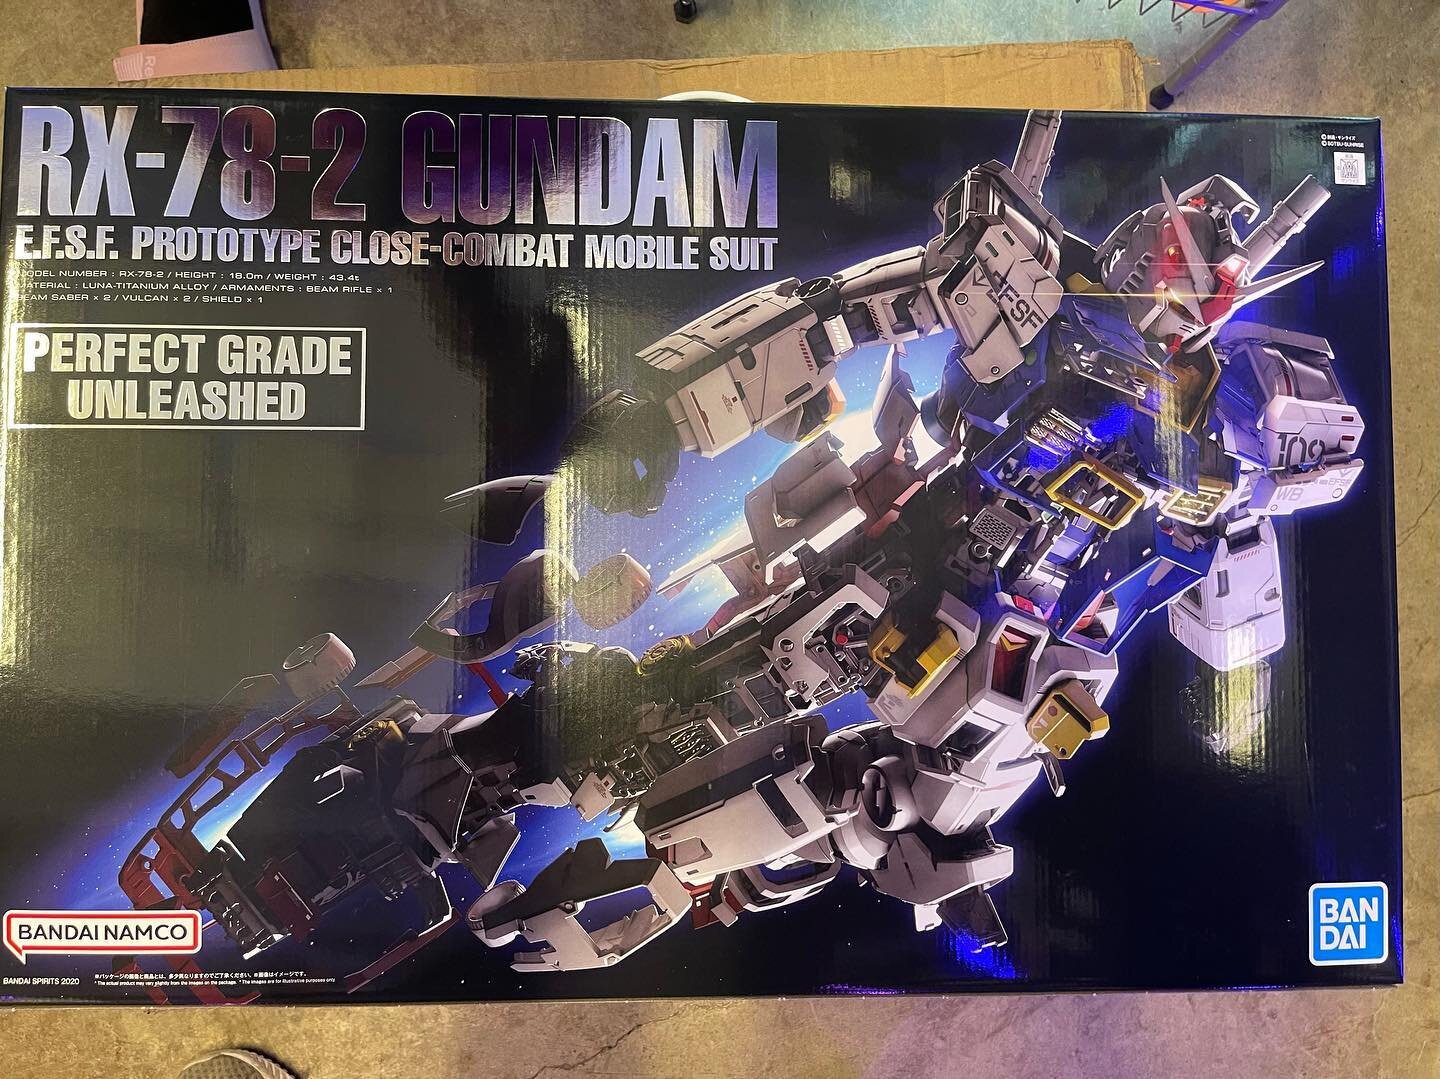 It&rsquo;s finally here the top tier perfect grade #gundamrx78 it&rsquo;s a pricey item but doesn&rsquo;t it look good!! We have #gundamunicorn #realgrade  and also #heavyarmsgundam #mastergrade #endleswaltz purchase online or in store for these grea